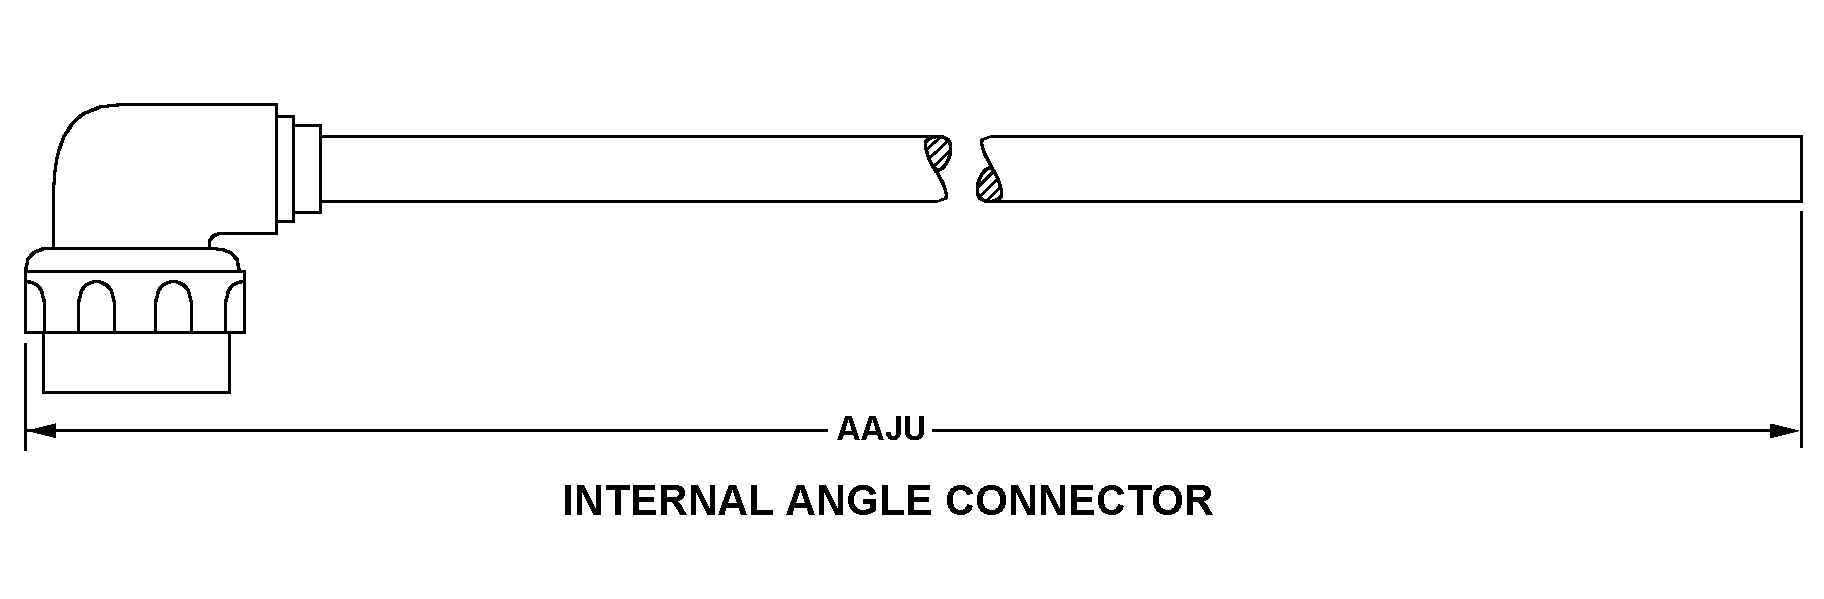 INTERNAL ANGLE CONNECTOR style nsn 5995-01-398-1544